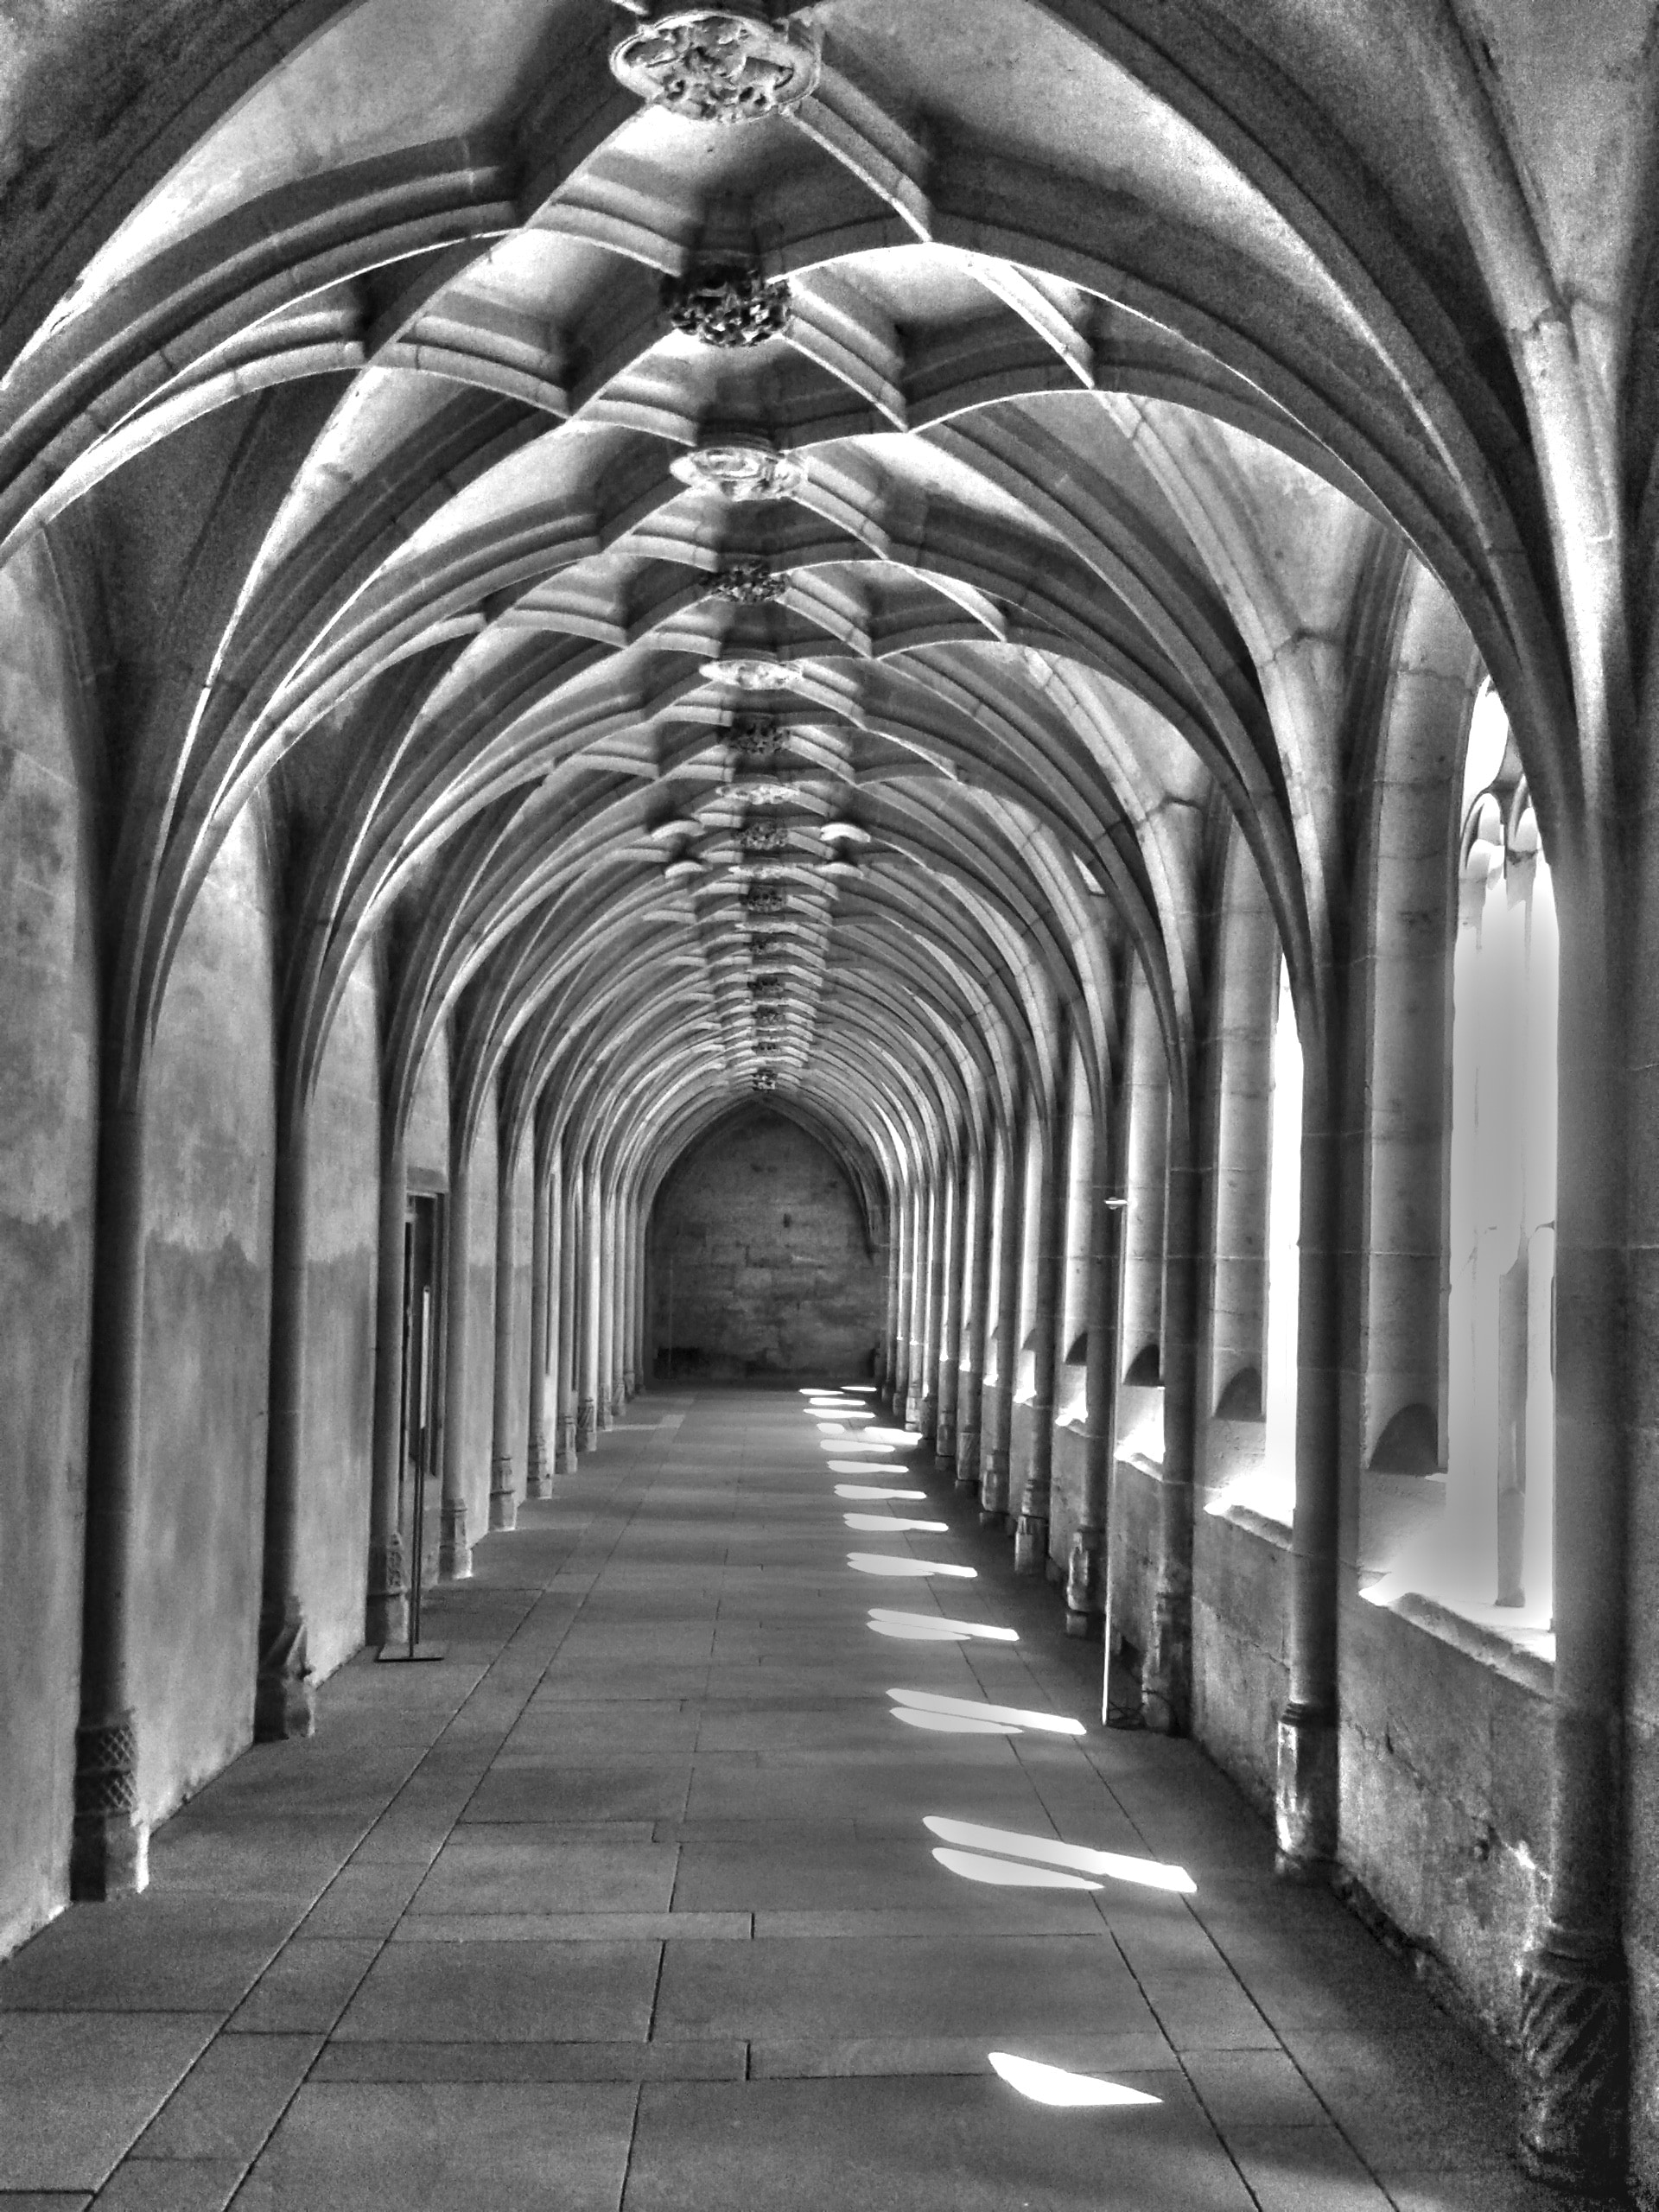 Building, Architecture, Vault, Cloister, arch, indoors